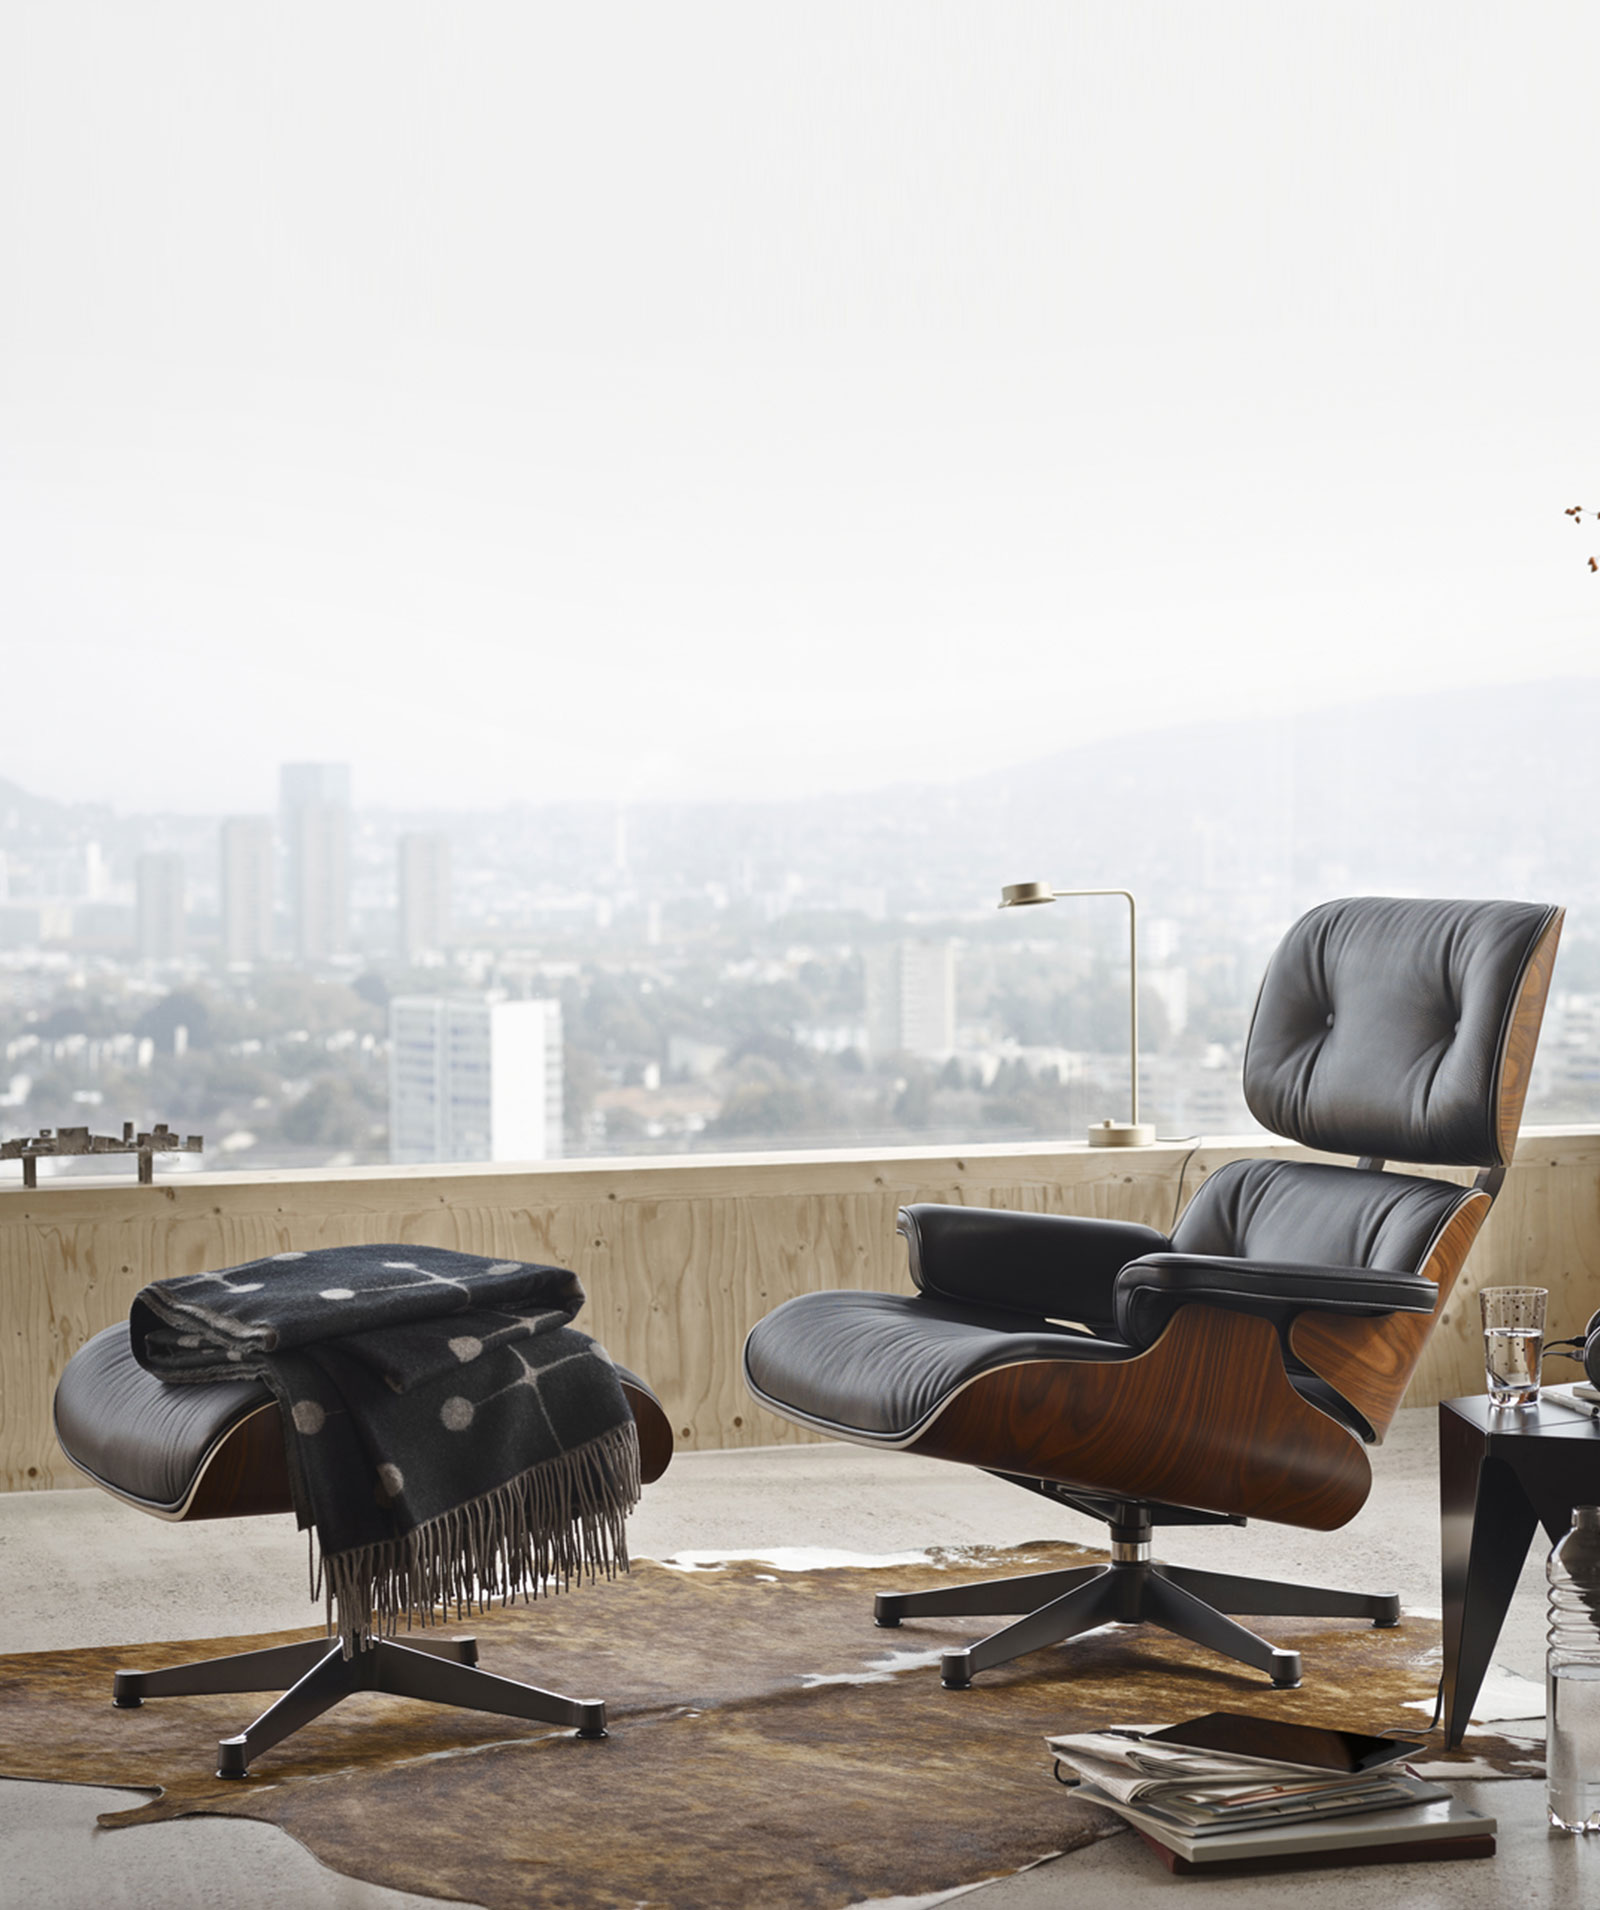 Eames Lounge Chair VITRA Charles & Ray Eames, 1956 -